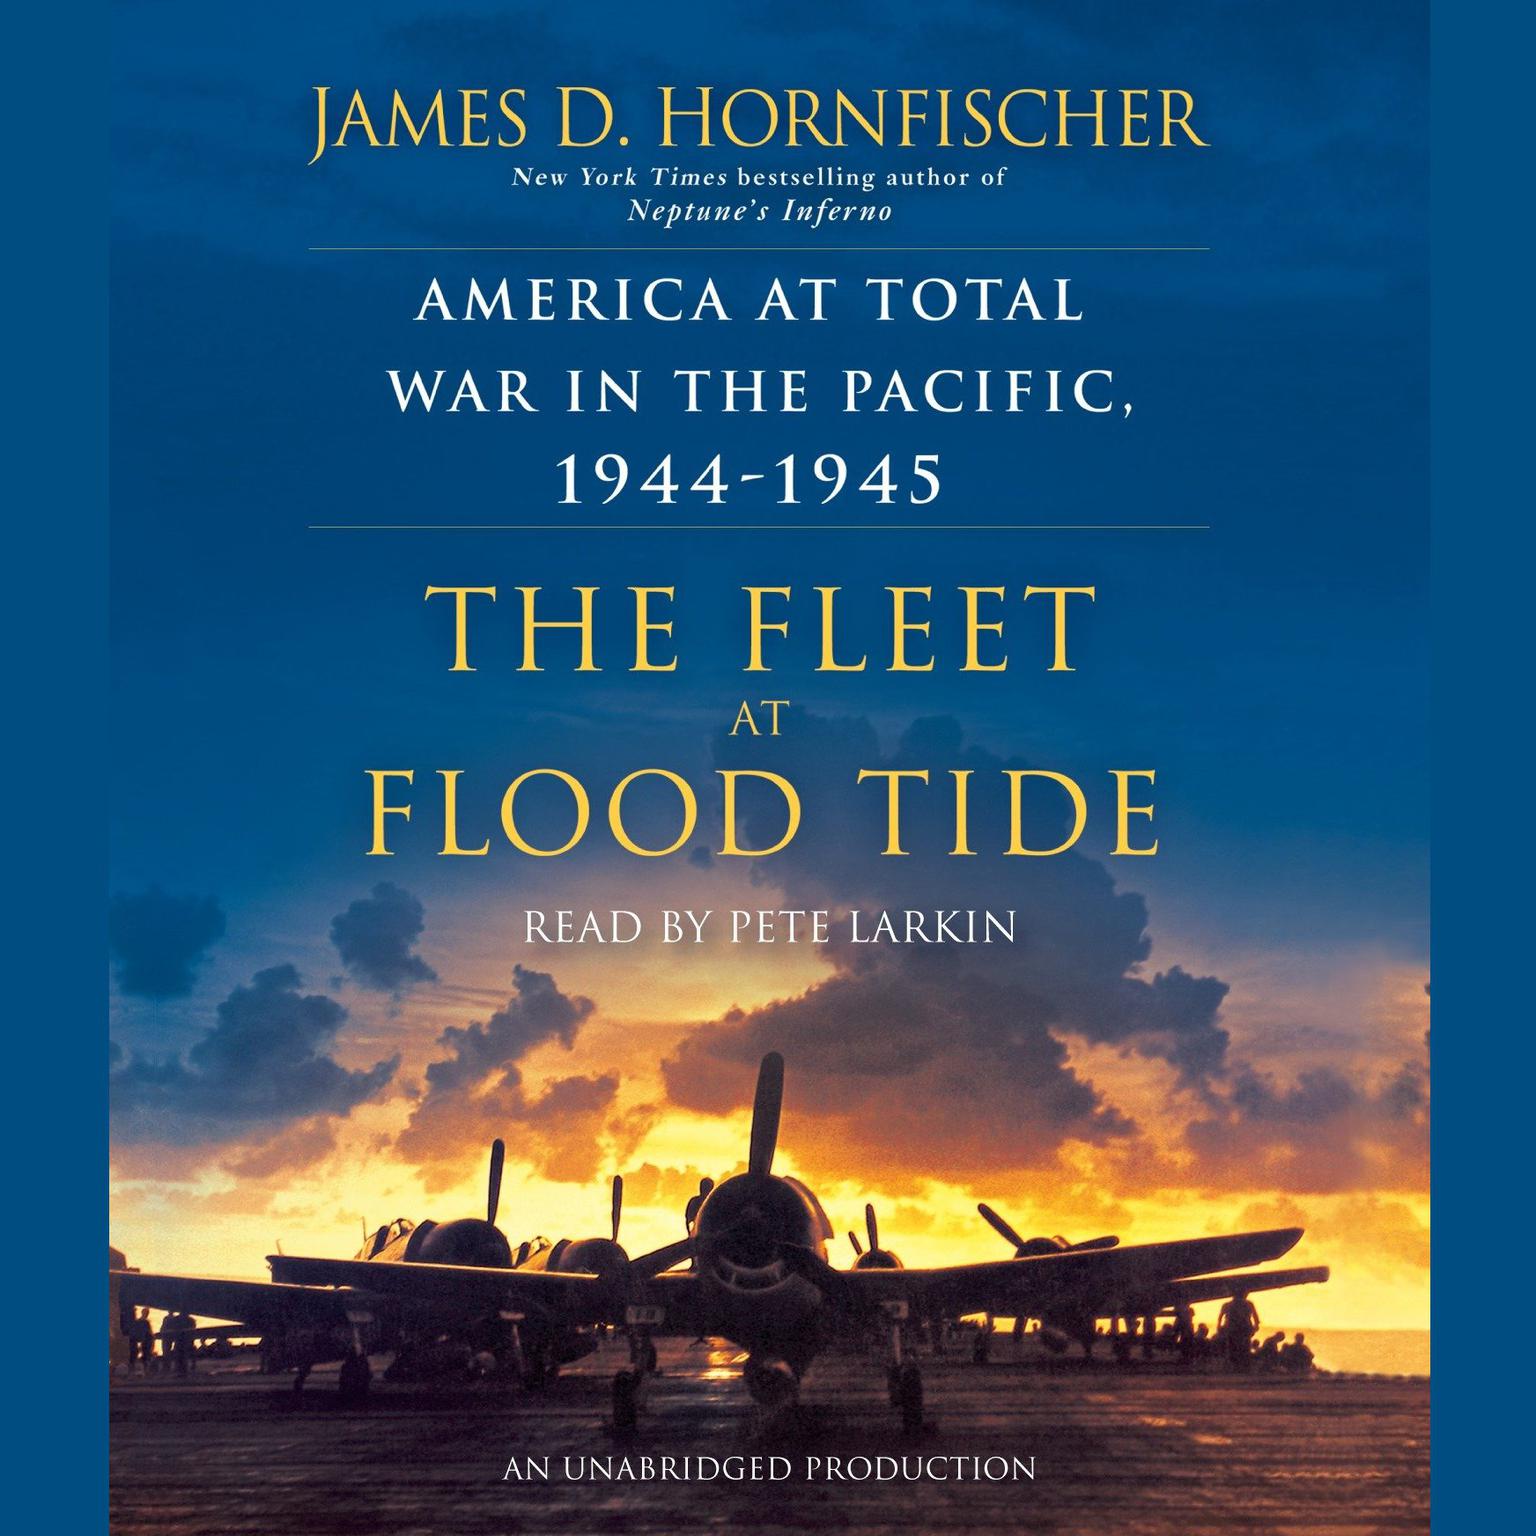 The Fleet at Flood Tide: America at Total War in the Pacific, 1944-1945 Audiobook, by James D. Hornfischer